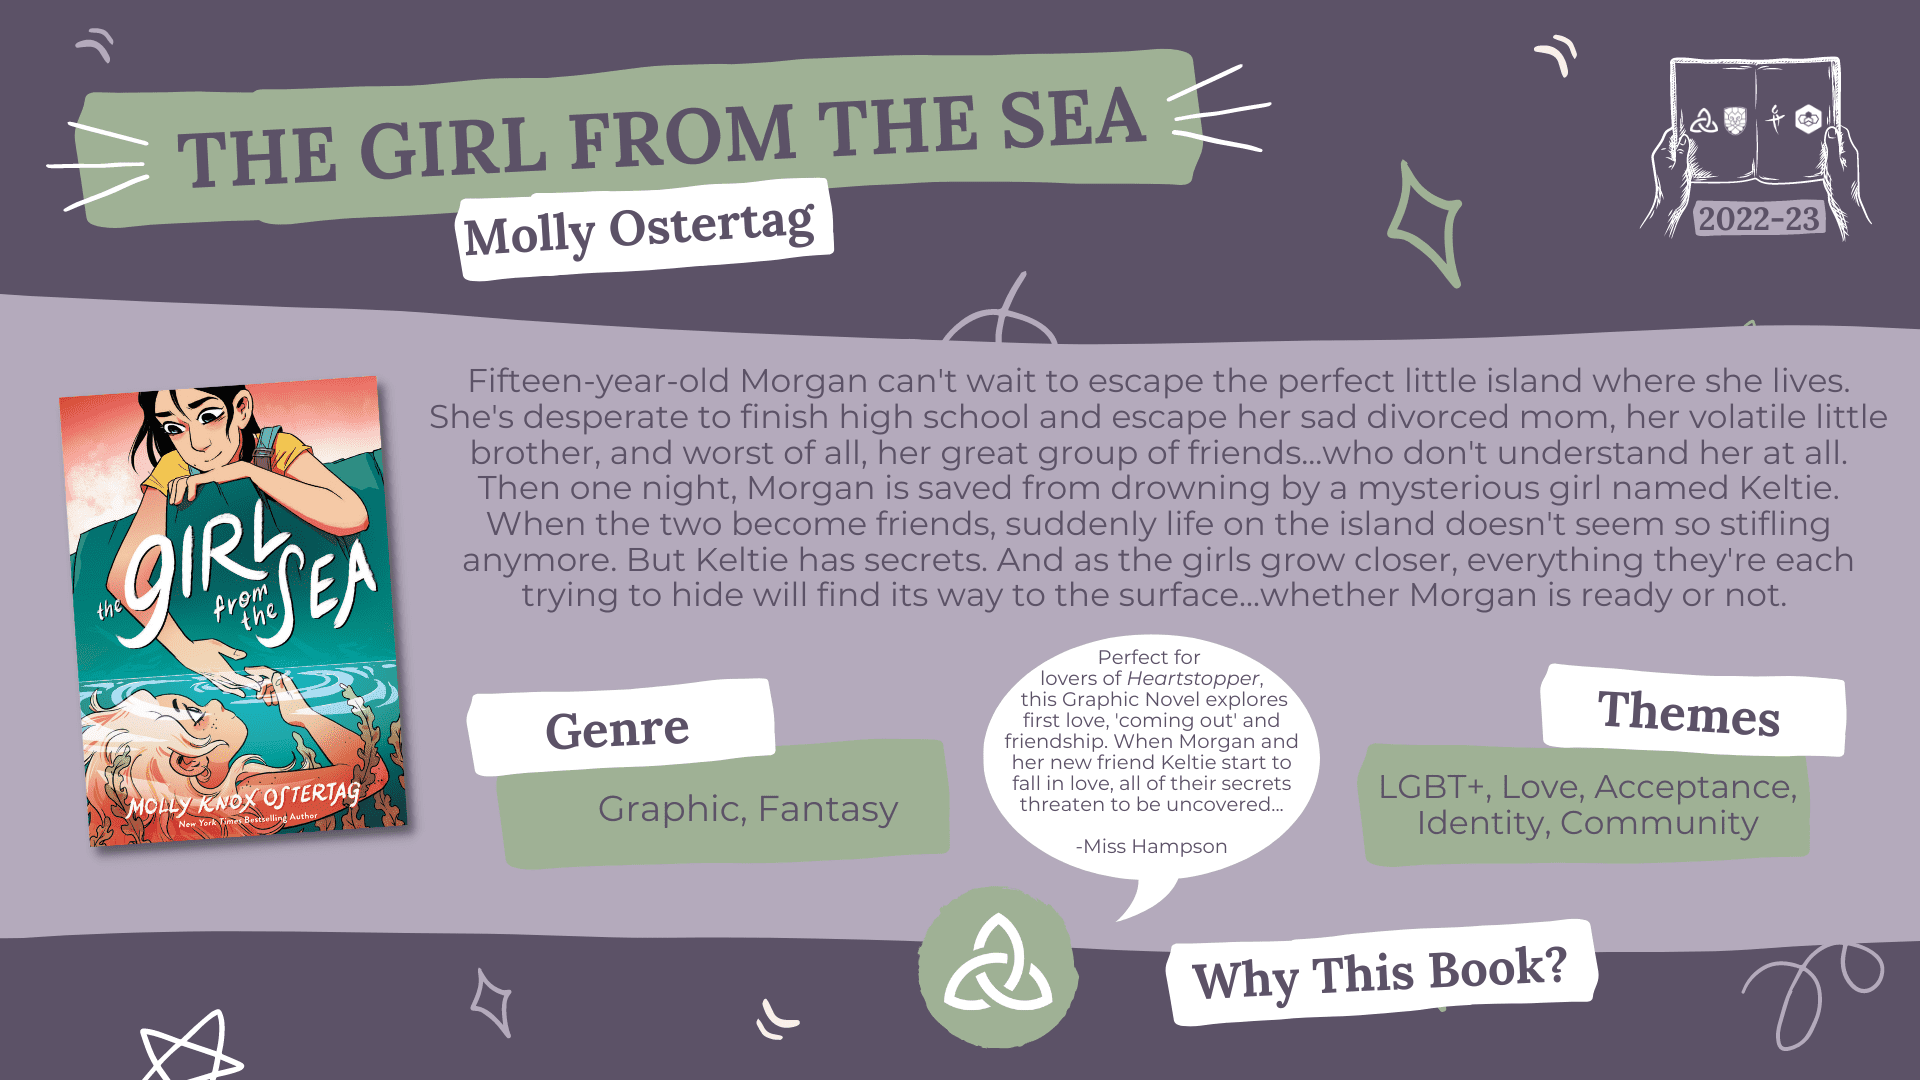 The Girl from the Sea by Molly Ostertag Genre: Graphic Novel, Fantasy Romance Themes: LGBT+, Love, Acceptance, Identity, Community Why this book? Perfect for lovers of Alice Oseman's Heartstopper (and recently adapted Netflix series), this Graphic Novel explores first love, 'coming out' and friendship. When Morgan and her new friend Keltie start to fall in love, all of their secrets threaten to be uncovered… -Miss Hampson